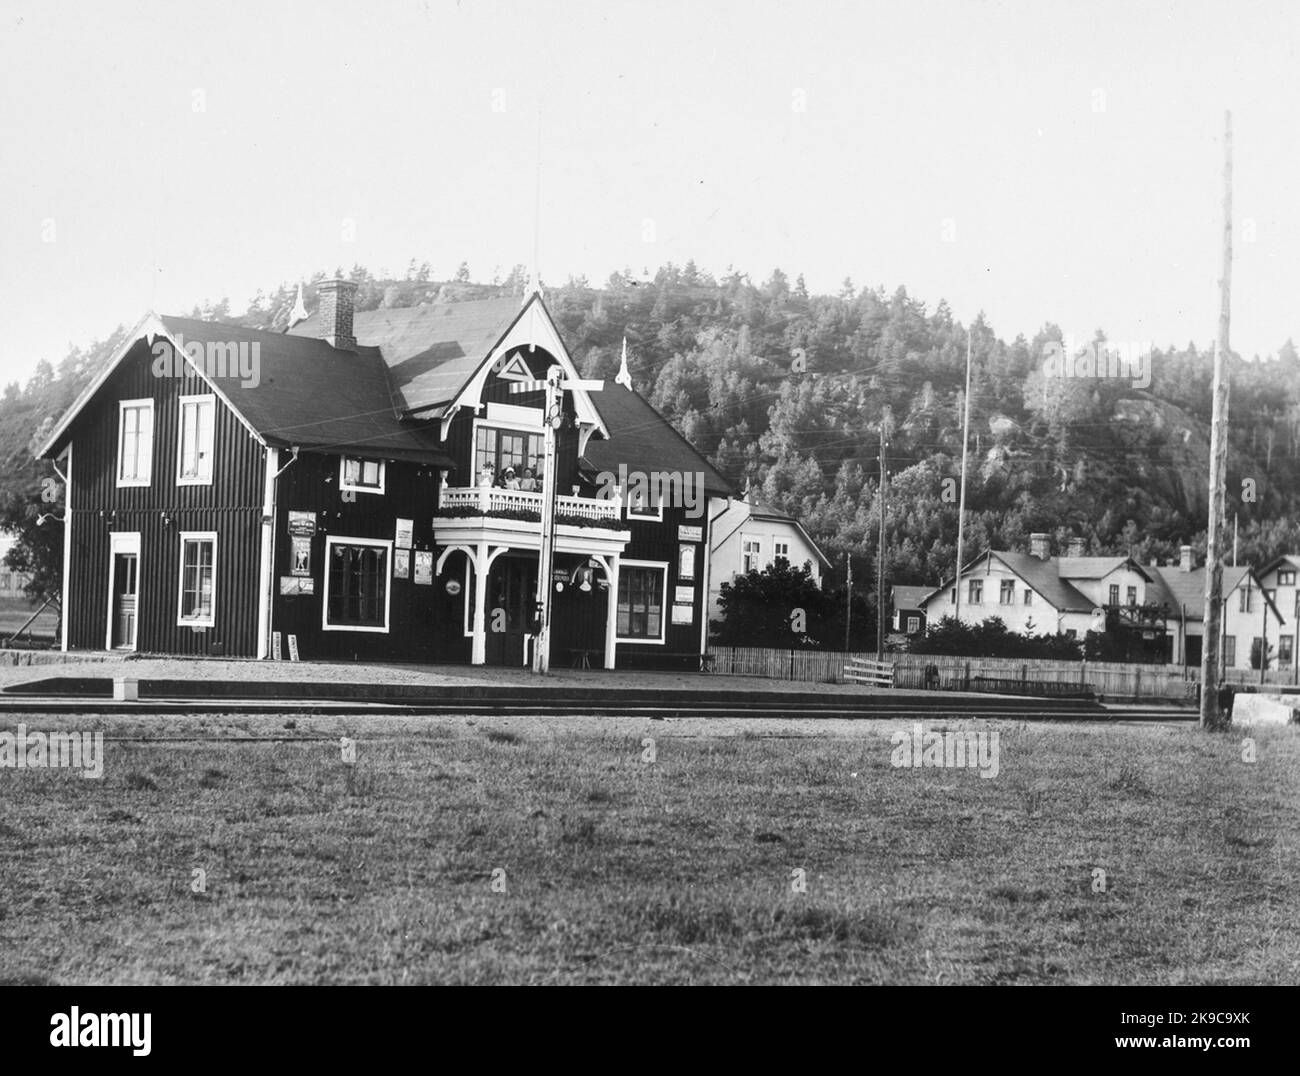 Station opened 27.9.1894. Station house with two floors in wood. Disclosed 31.10.1959. The station house left in 1988, but heavily rebuilt. When Vbäj joined in 1911, a railway hotel was built. Station built in 1896. One- and a half-storey station houses in Träfj, Falkenbergs Railway Red, white knots, moldings, feed balcony and posts. Moss green doors and windows, black roof. Stock Photo